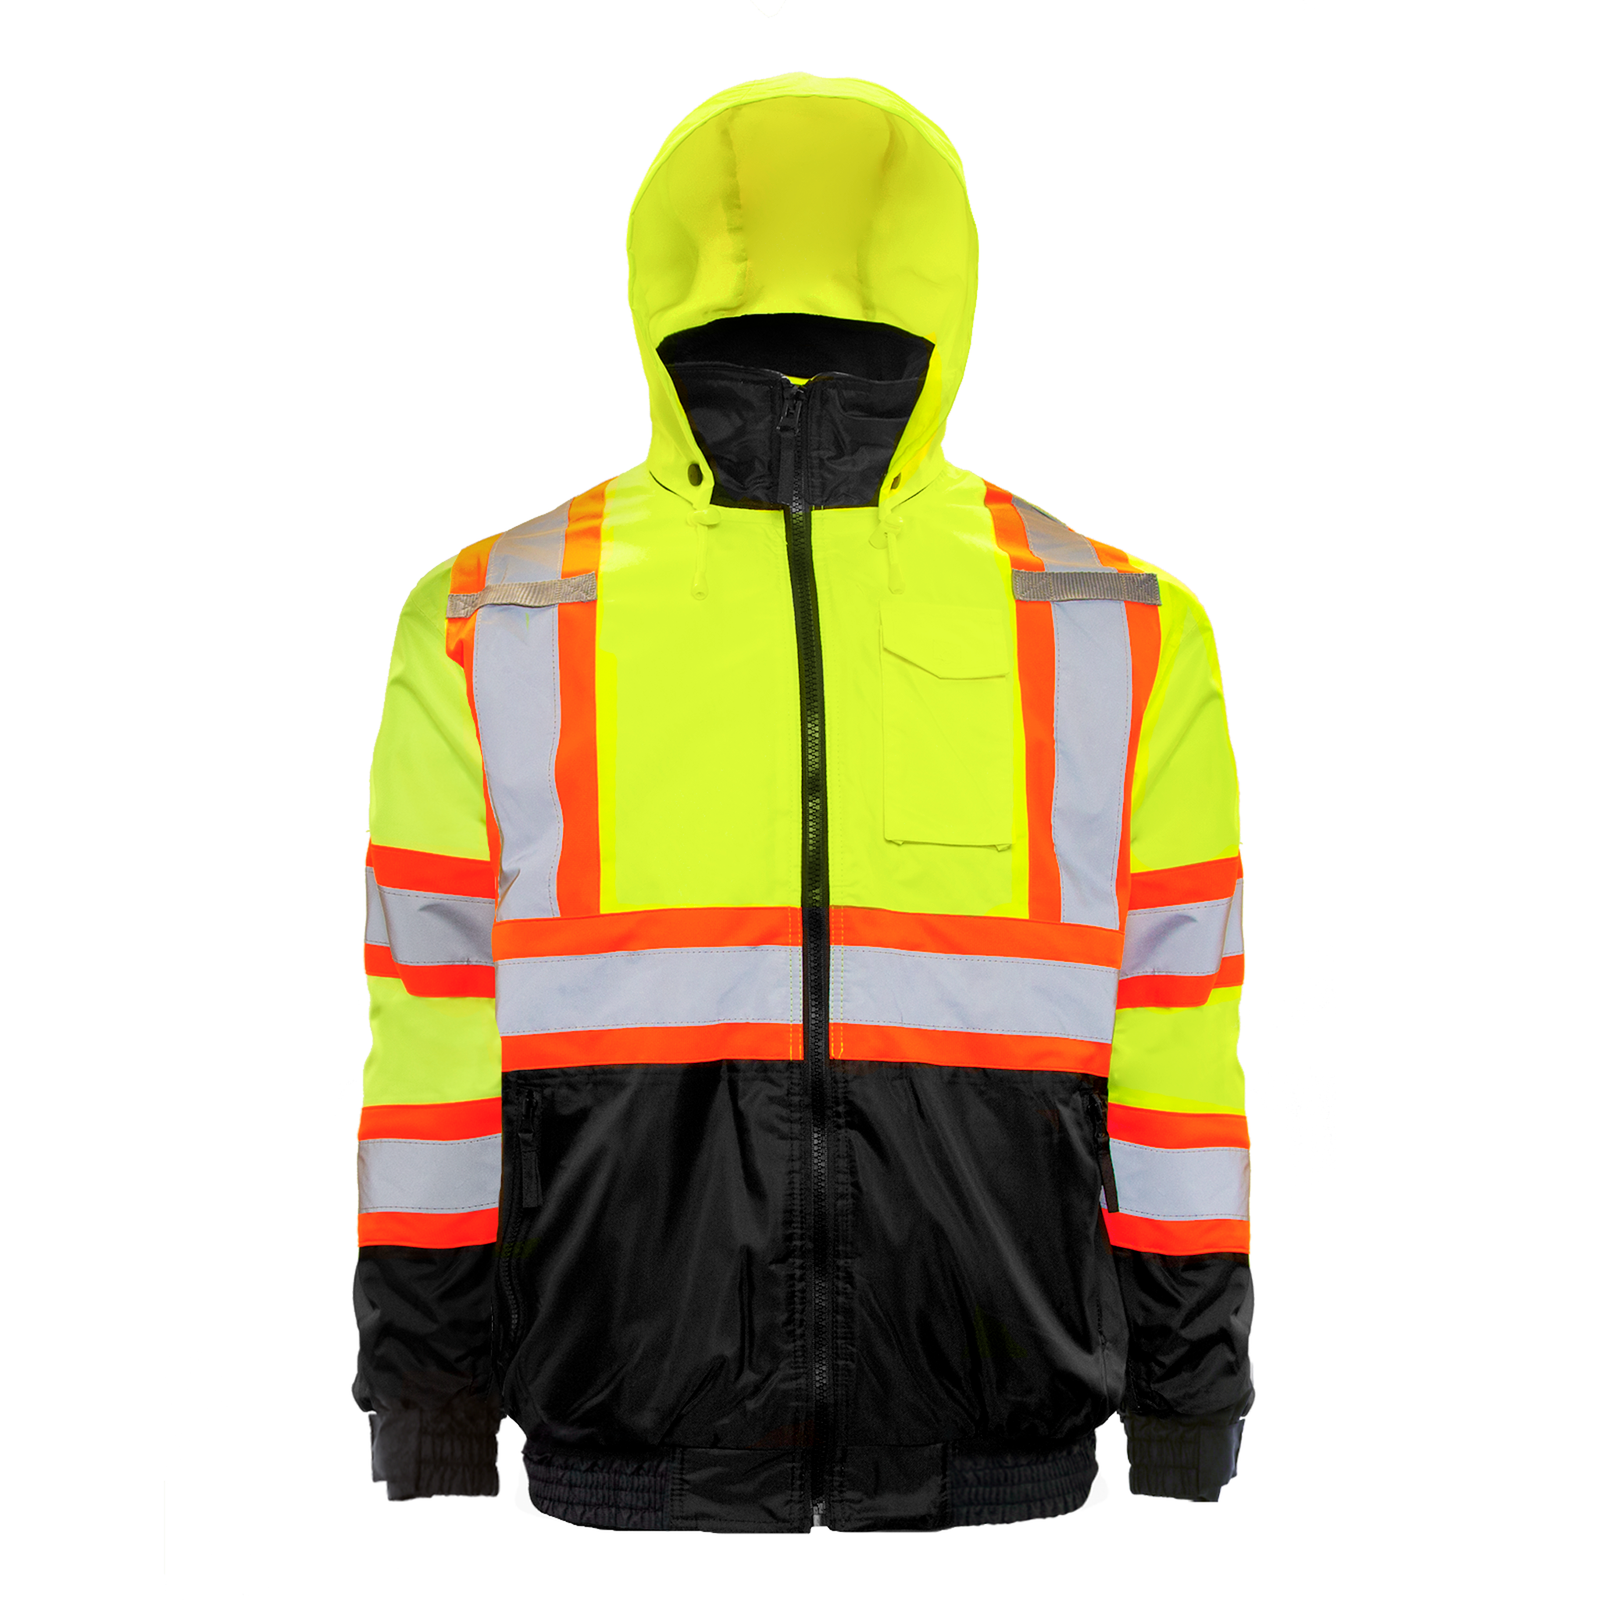 Front view of the yellow and black JORESTECH Hi-vis two tone safety bomber jacket with reflective stripes and hoodie, ANSI class 3 type R